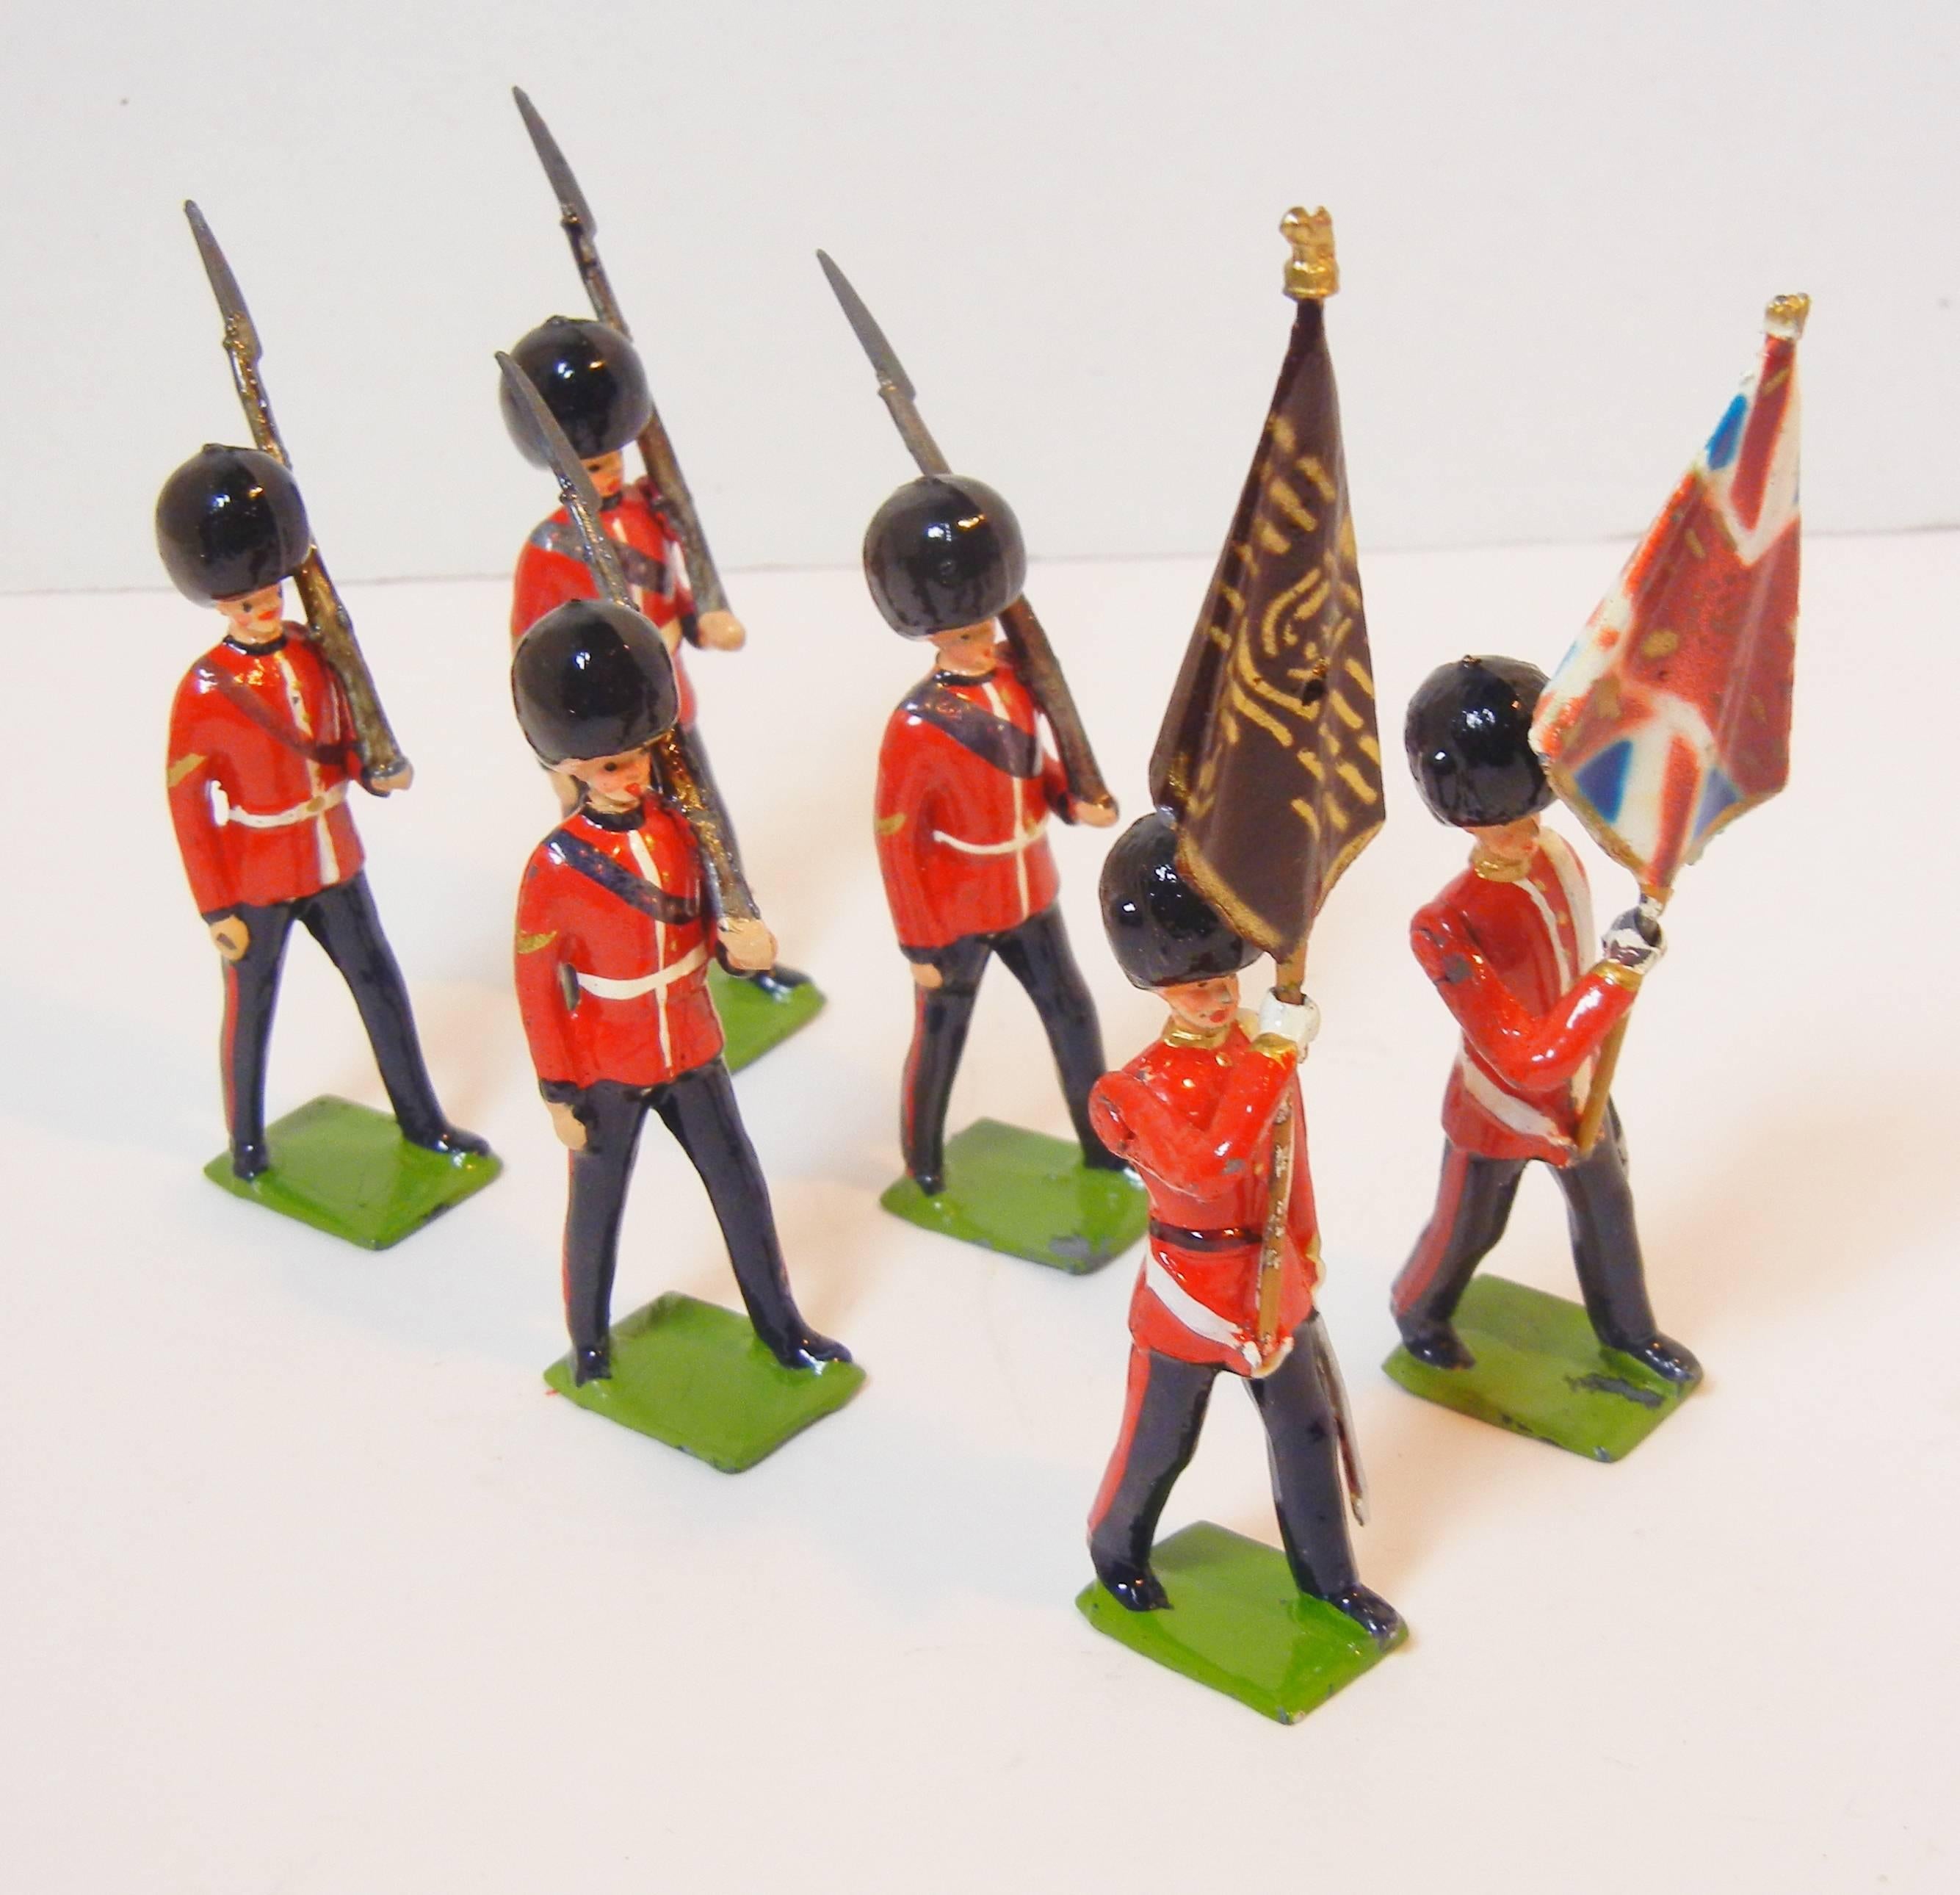 British Color Party of the Scots Guards, Vintage Lead Toy Soldiers by W. Britain Ltd